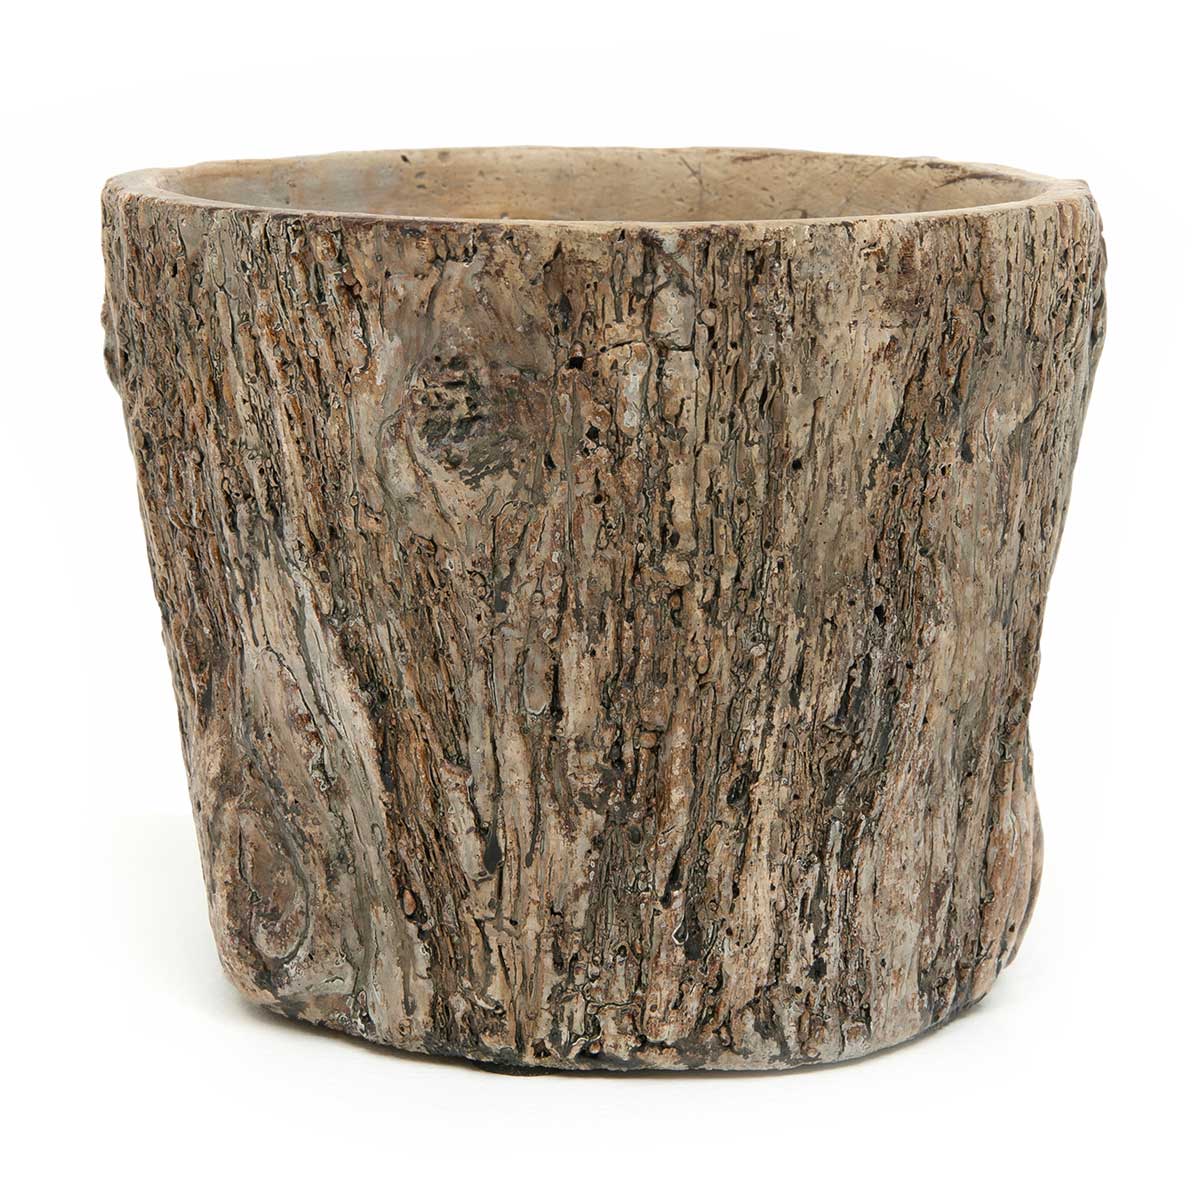 POT BARK LARGE 6IN X 5IN BROWN CONCRETE